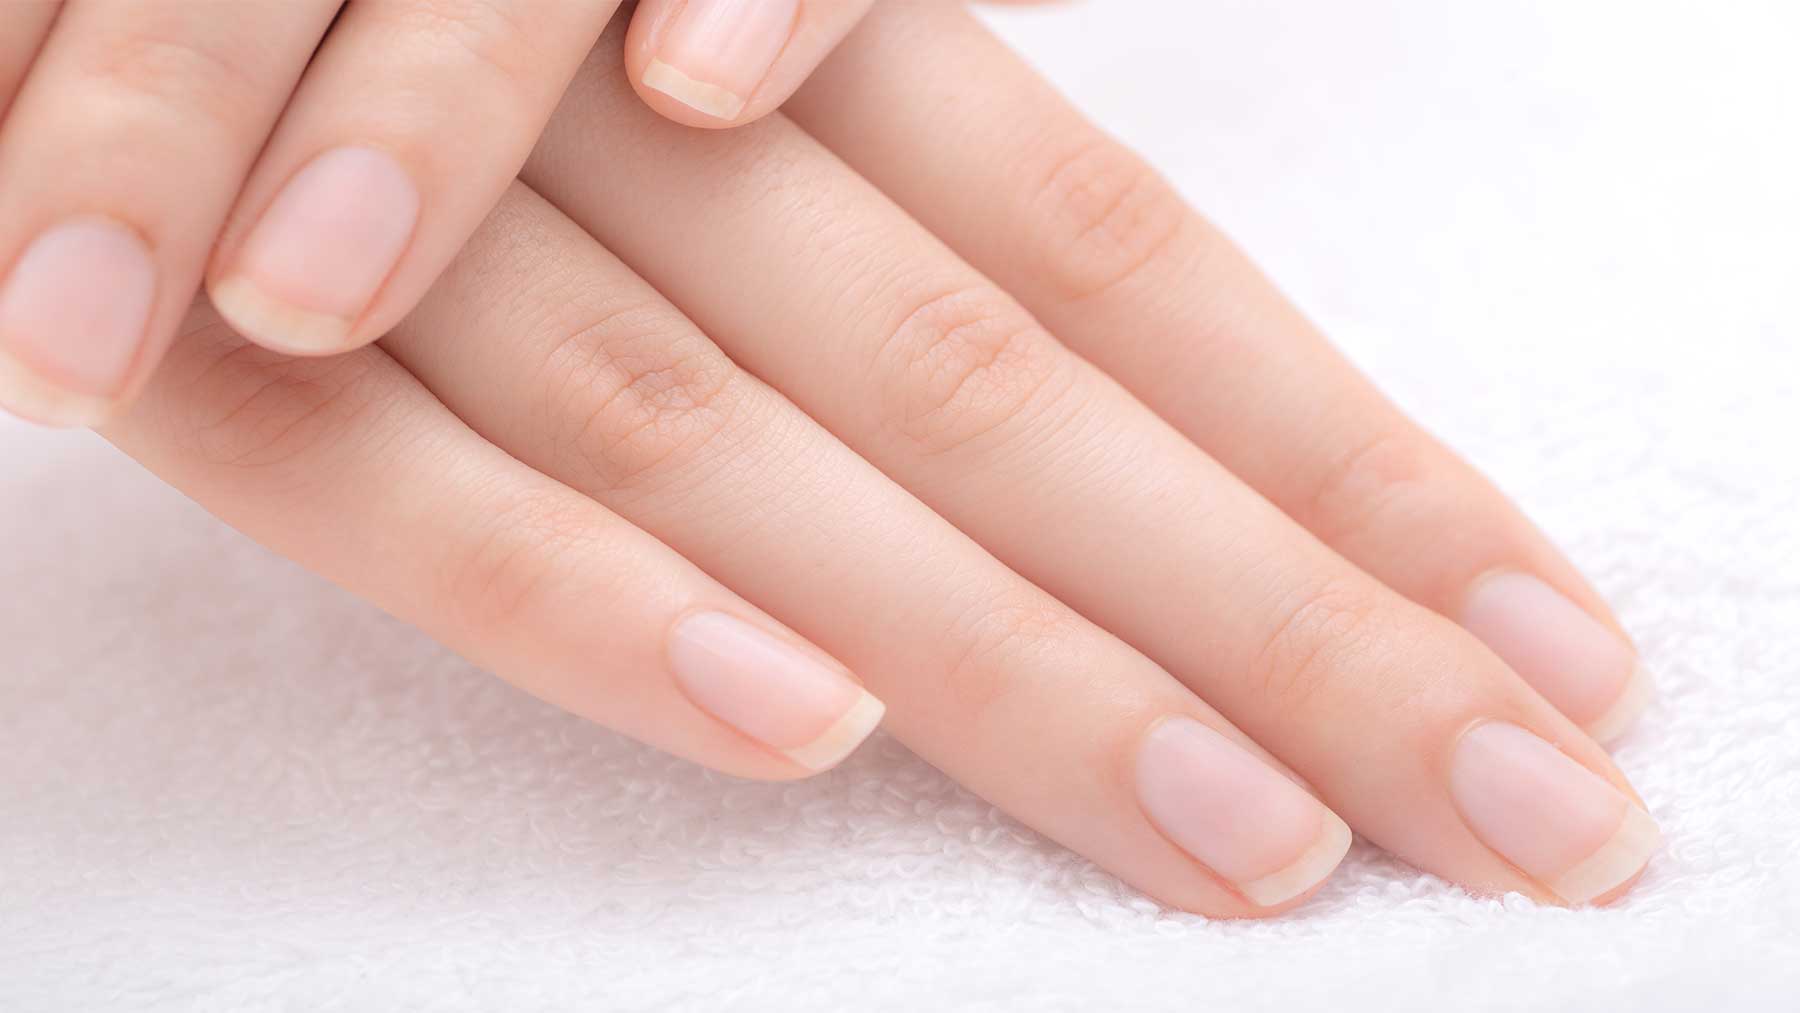 6. How to Teach Your Little Girl (11-15) to Take Care of Her Nails and Keep Them Healthy - wide 8